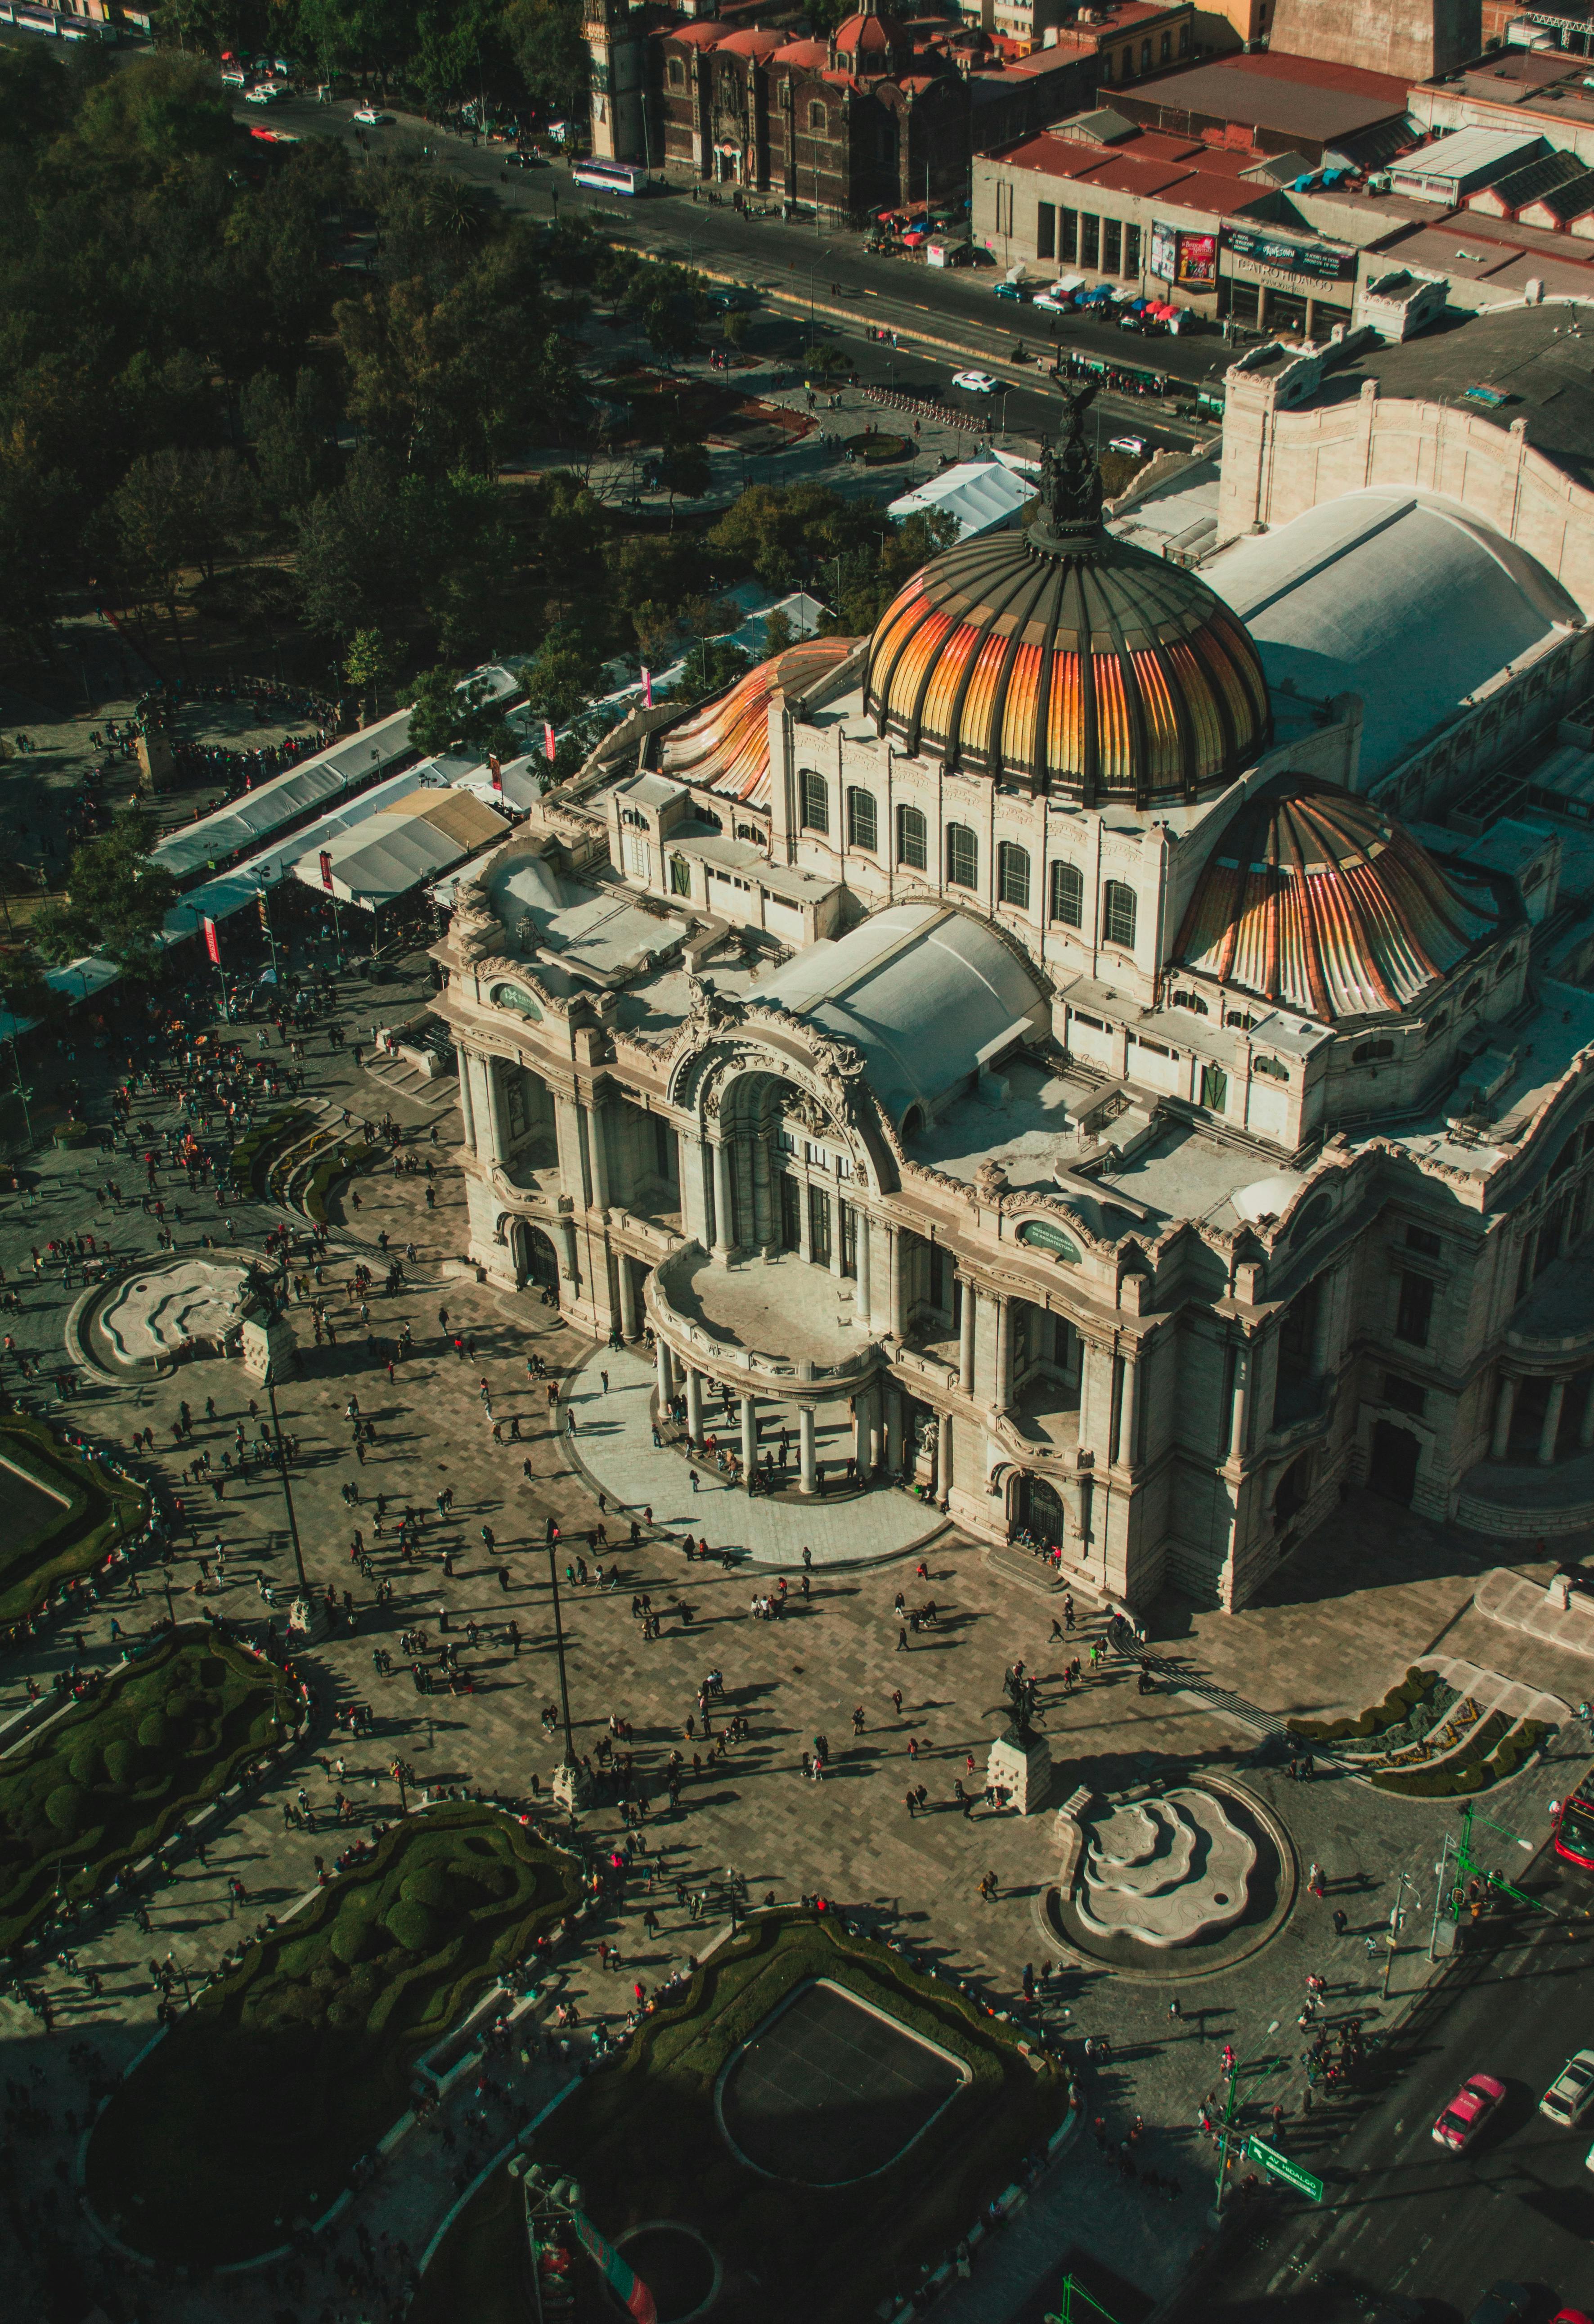 Wallpaper  Mexico City building park people town square sky clouds  street trees hedges 3840x2160  SkyWolfX  2231776  HD Wallpapers   WallHere